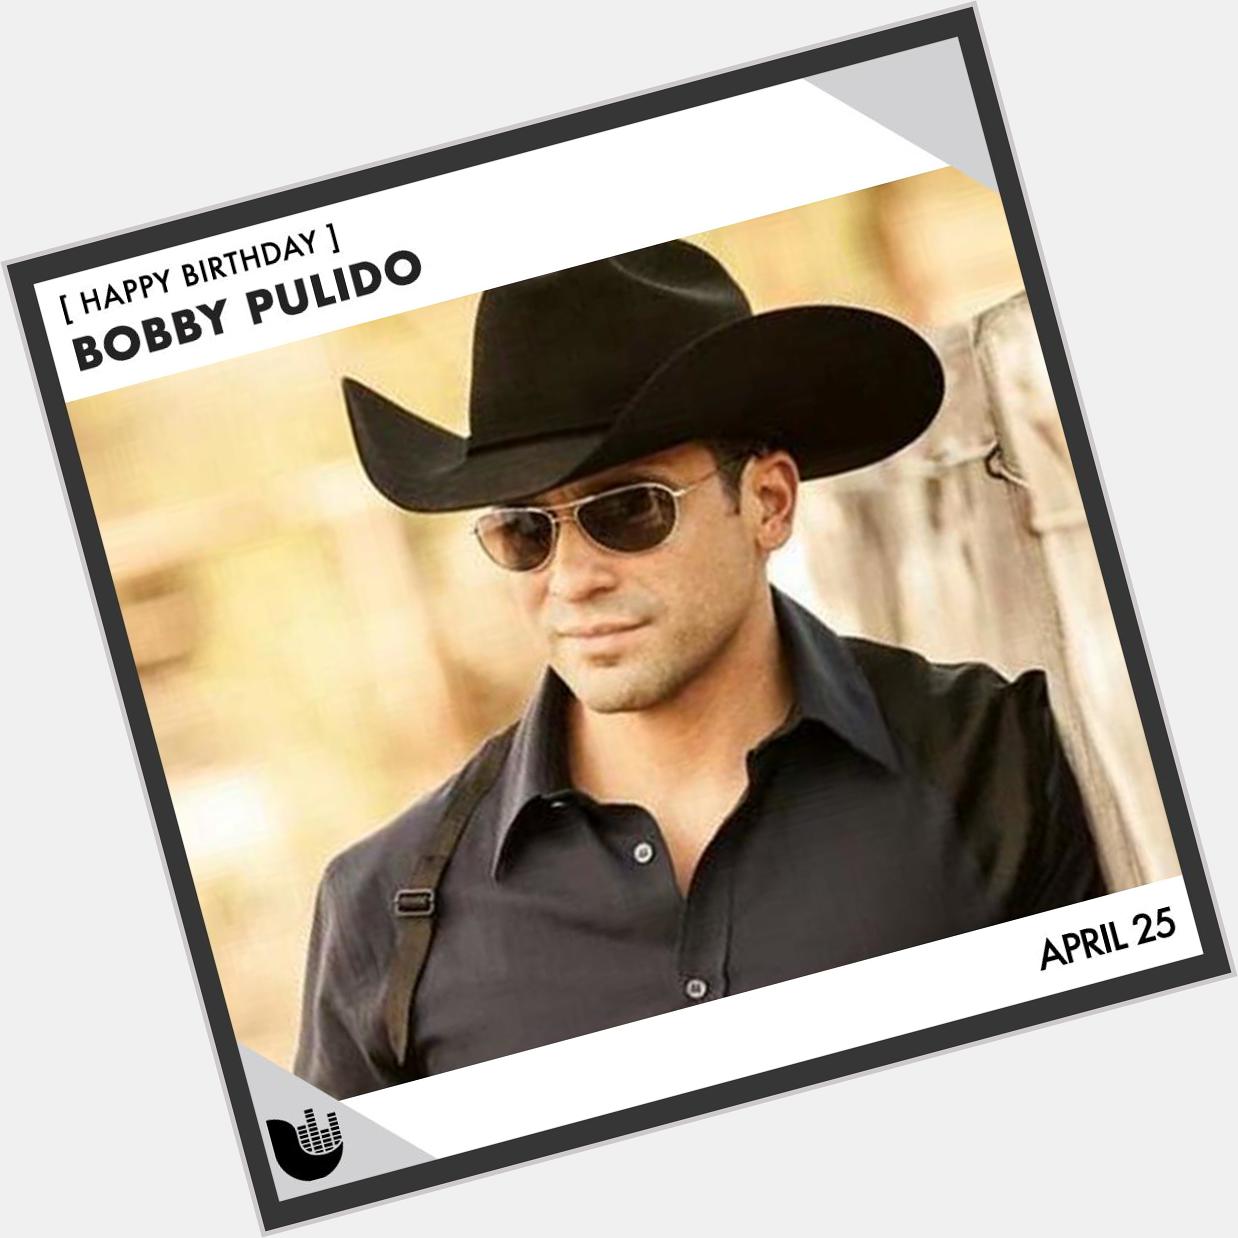 Join us in wishing a happy birthday to Bobby Pulido today! 